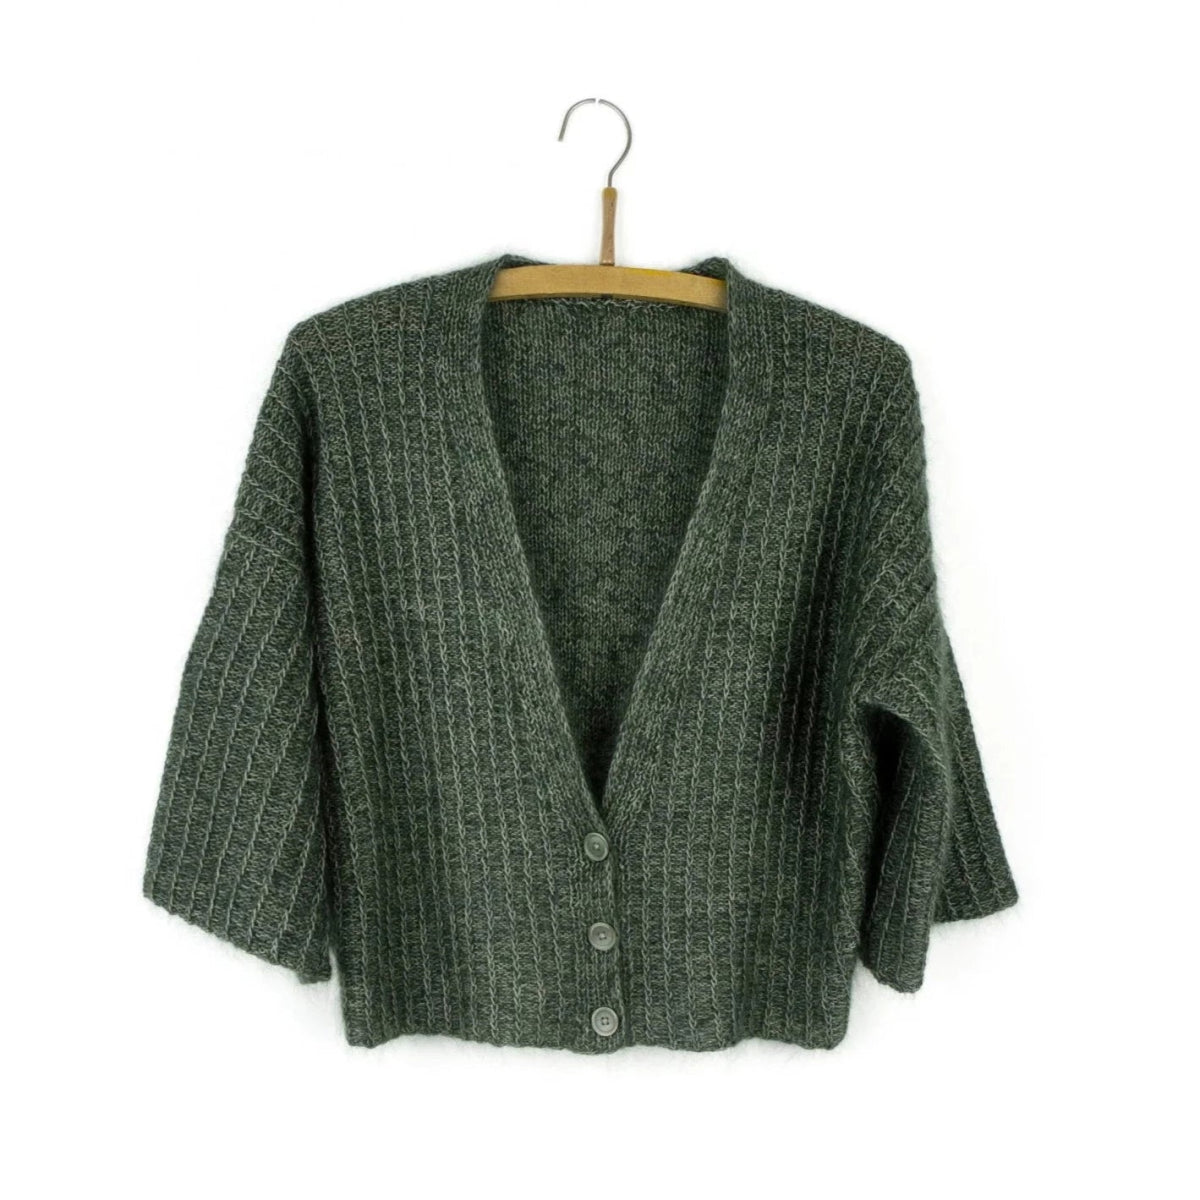 Isager Chilly Cardigan - Coming Soon - Isager - The Little Yarn Store